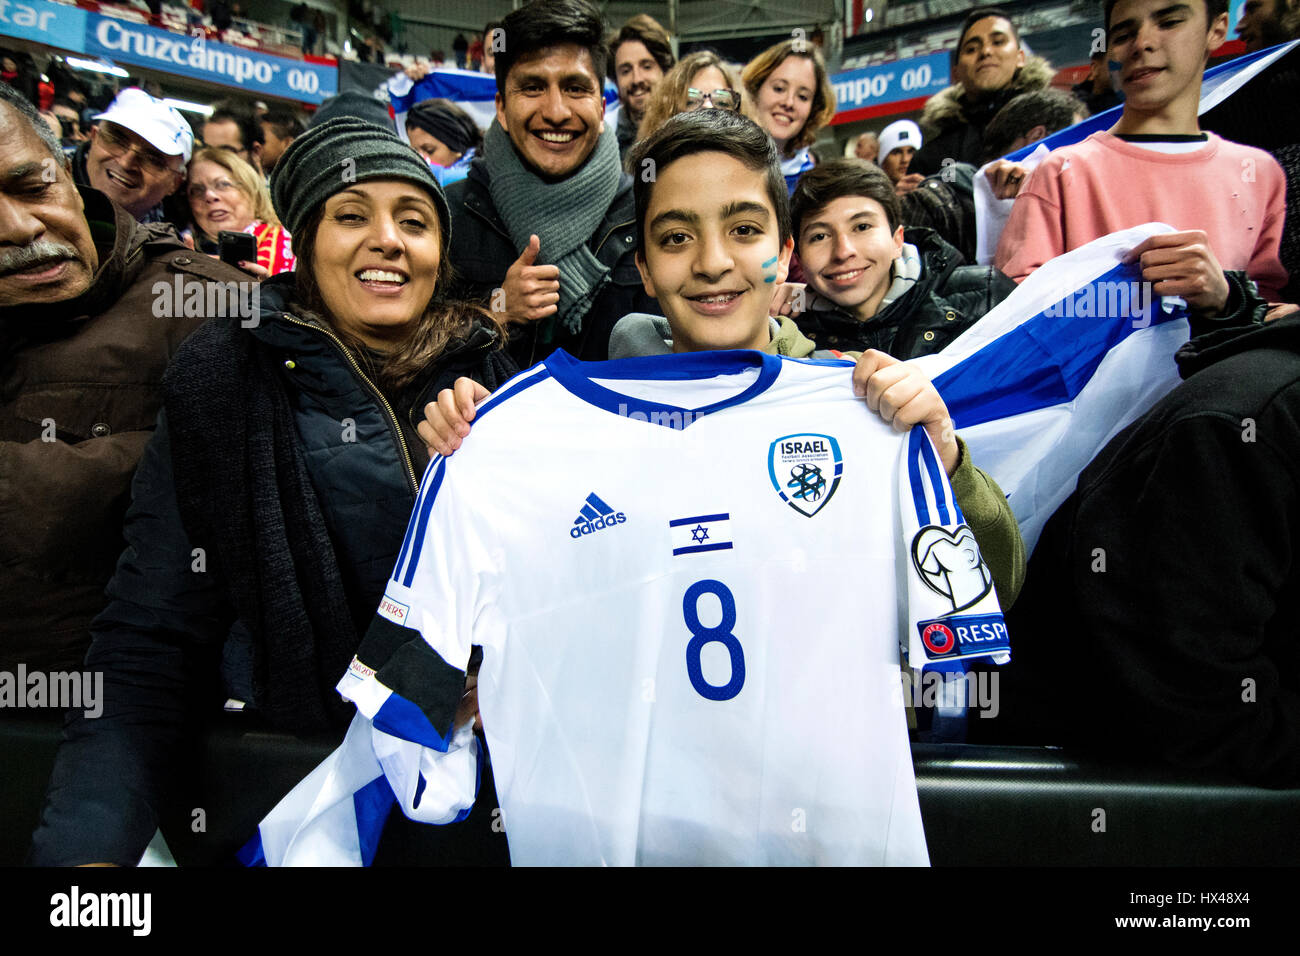 Gijon, Spain. 24th March, 2017. Israelian Supporters with t-shirt of Almog Cohen (Israel) during the football match of FIFA World Cup 2018 Qualifying Round between Spain and Israel at Molinon Stadium on March 24, 2016 in Gijon, Spain. ©David Gato/Alamy Live News Stock Photo